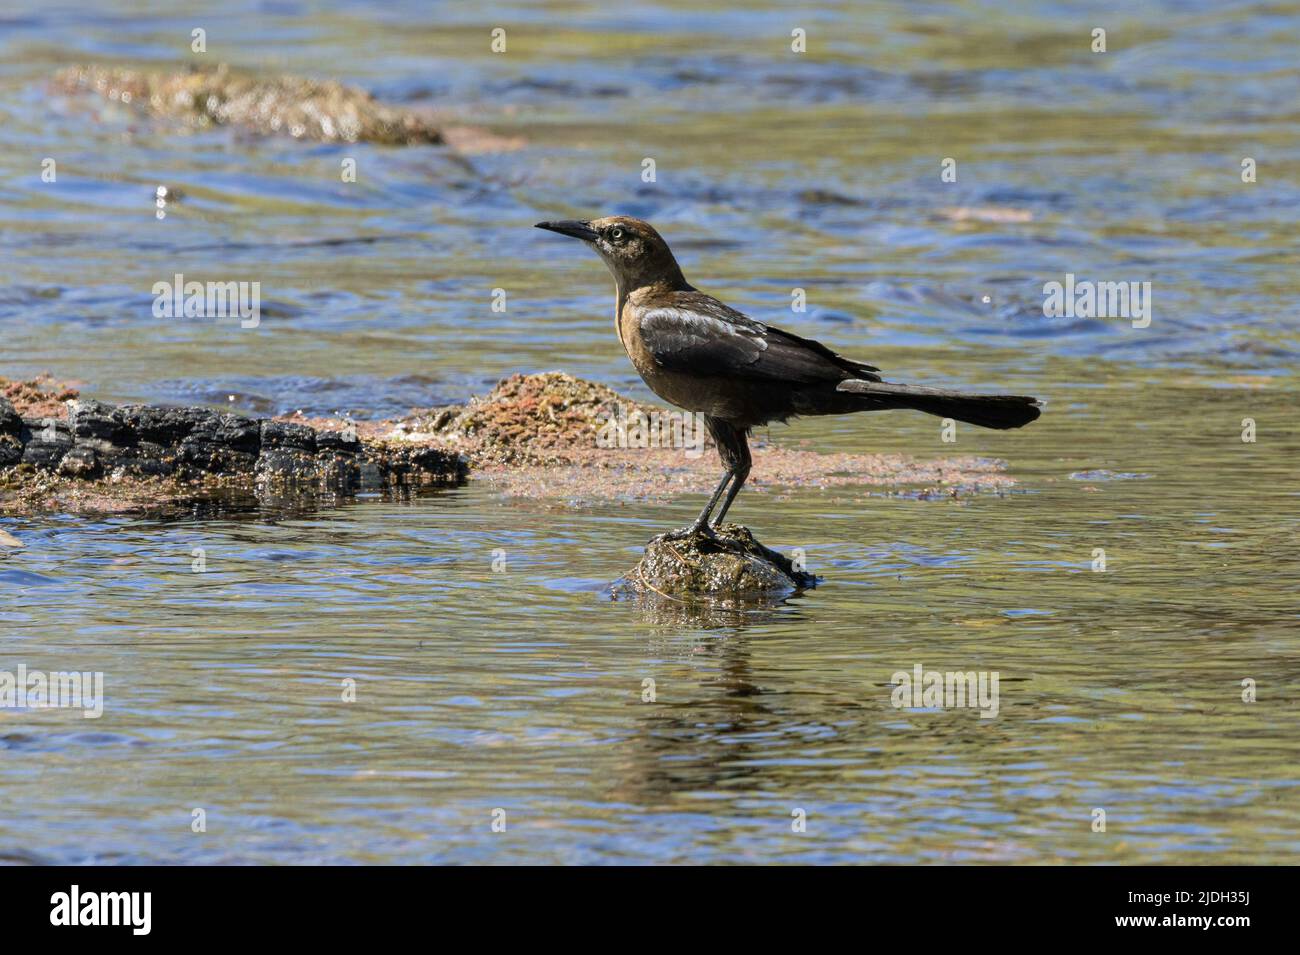 common grackle (Quiscalus quiscula), juvenile, foranging at the river, USA, Arizona, Salt River Stock Photo